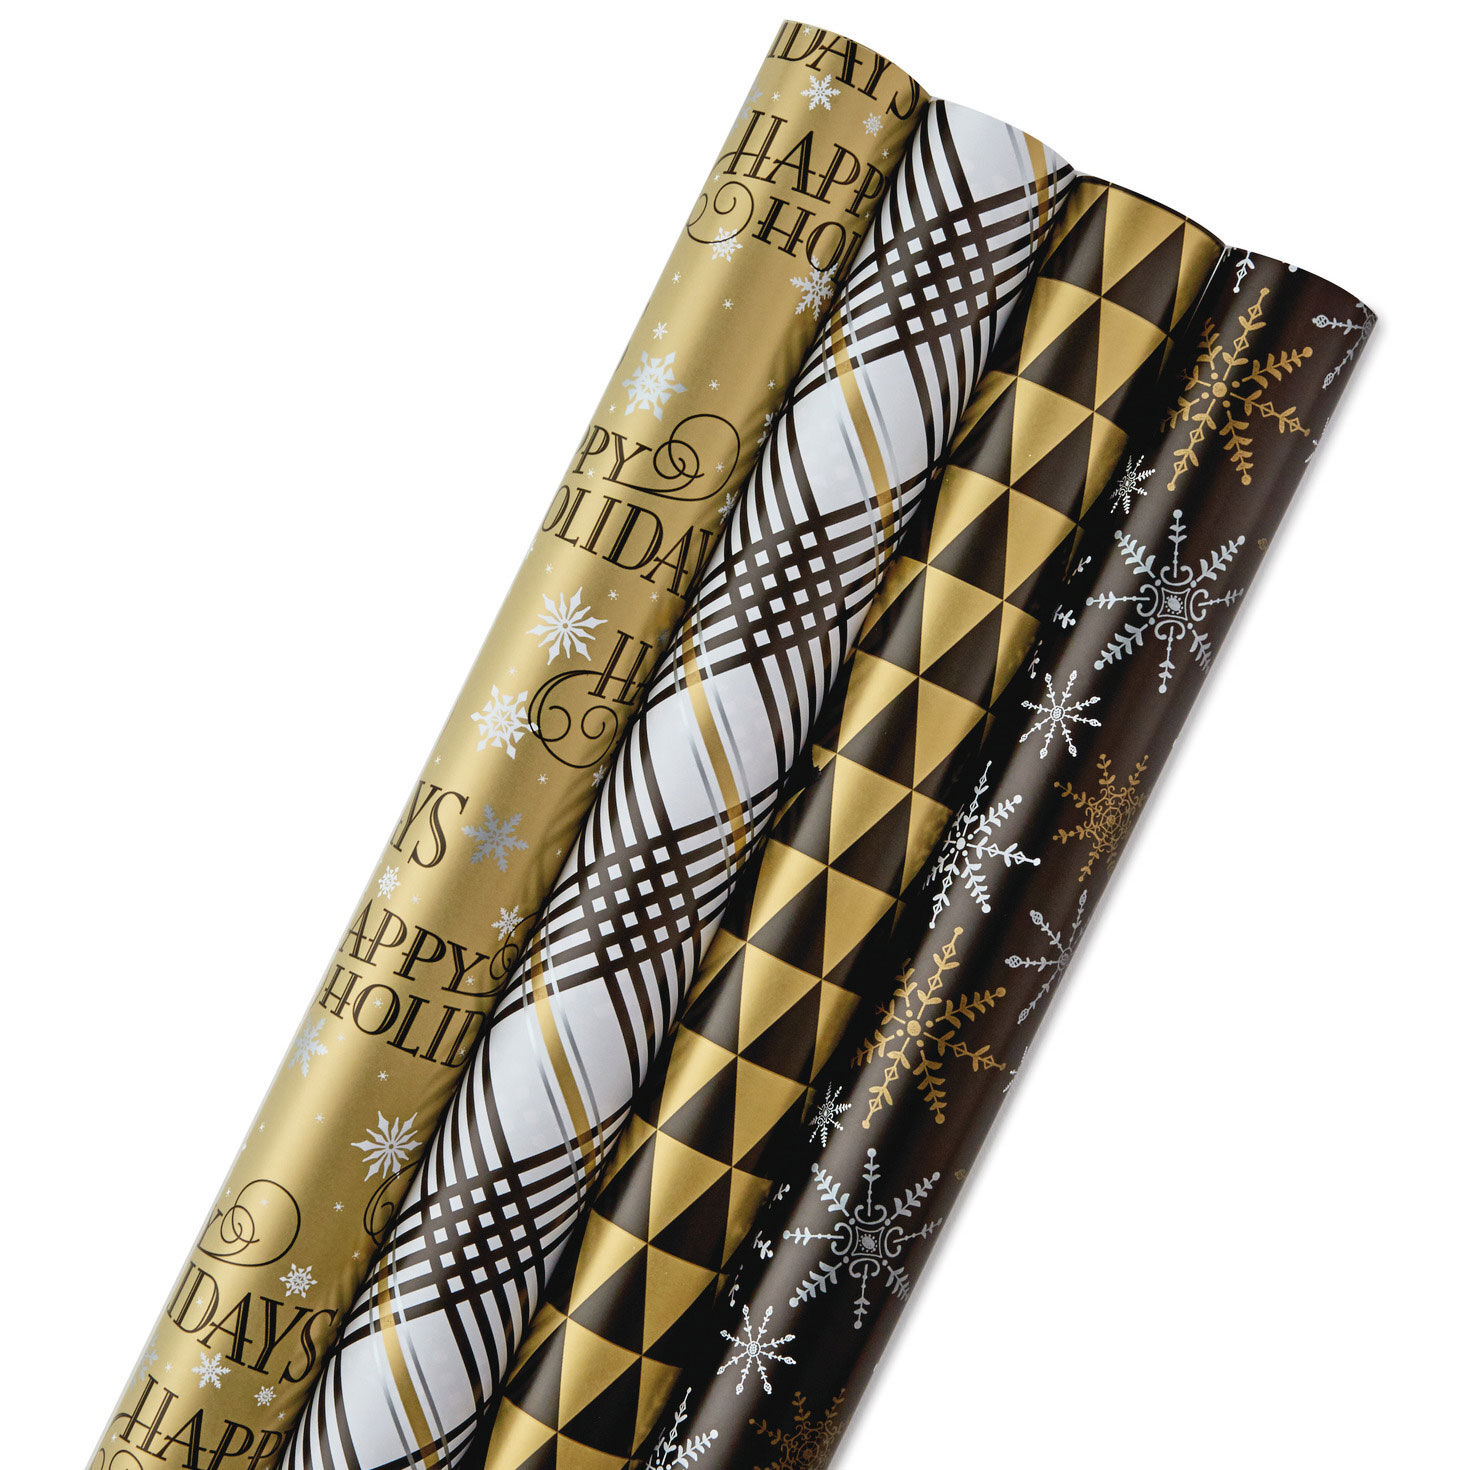 Wrapping Paper Roll - Black Gold Design for Birthday, Holiday, Baby Shower  - 4 R